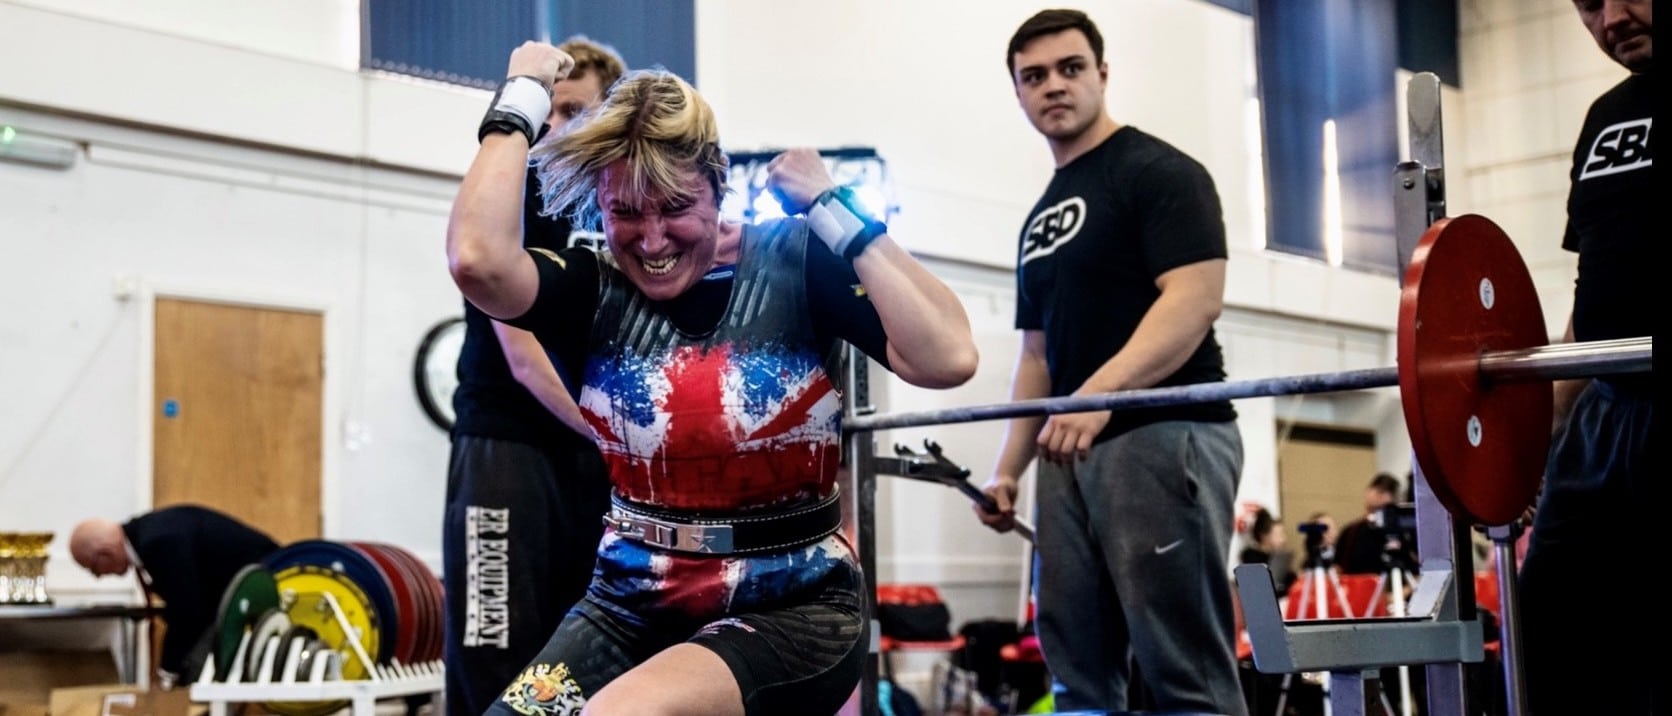 Powerlifting star kelly clark, to compete for england in commonwealth championships in new zealand